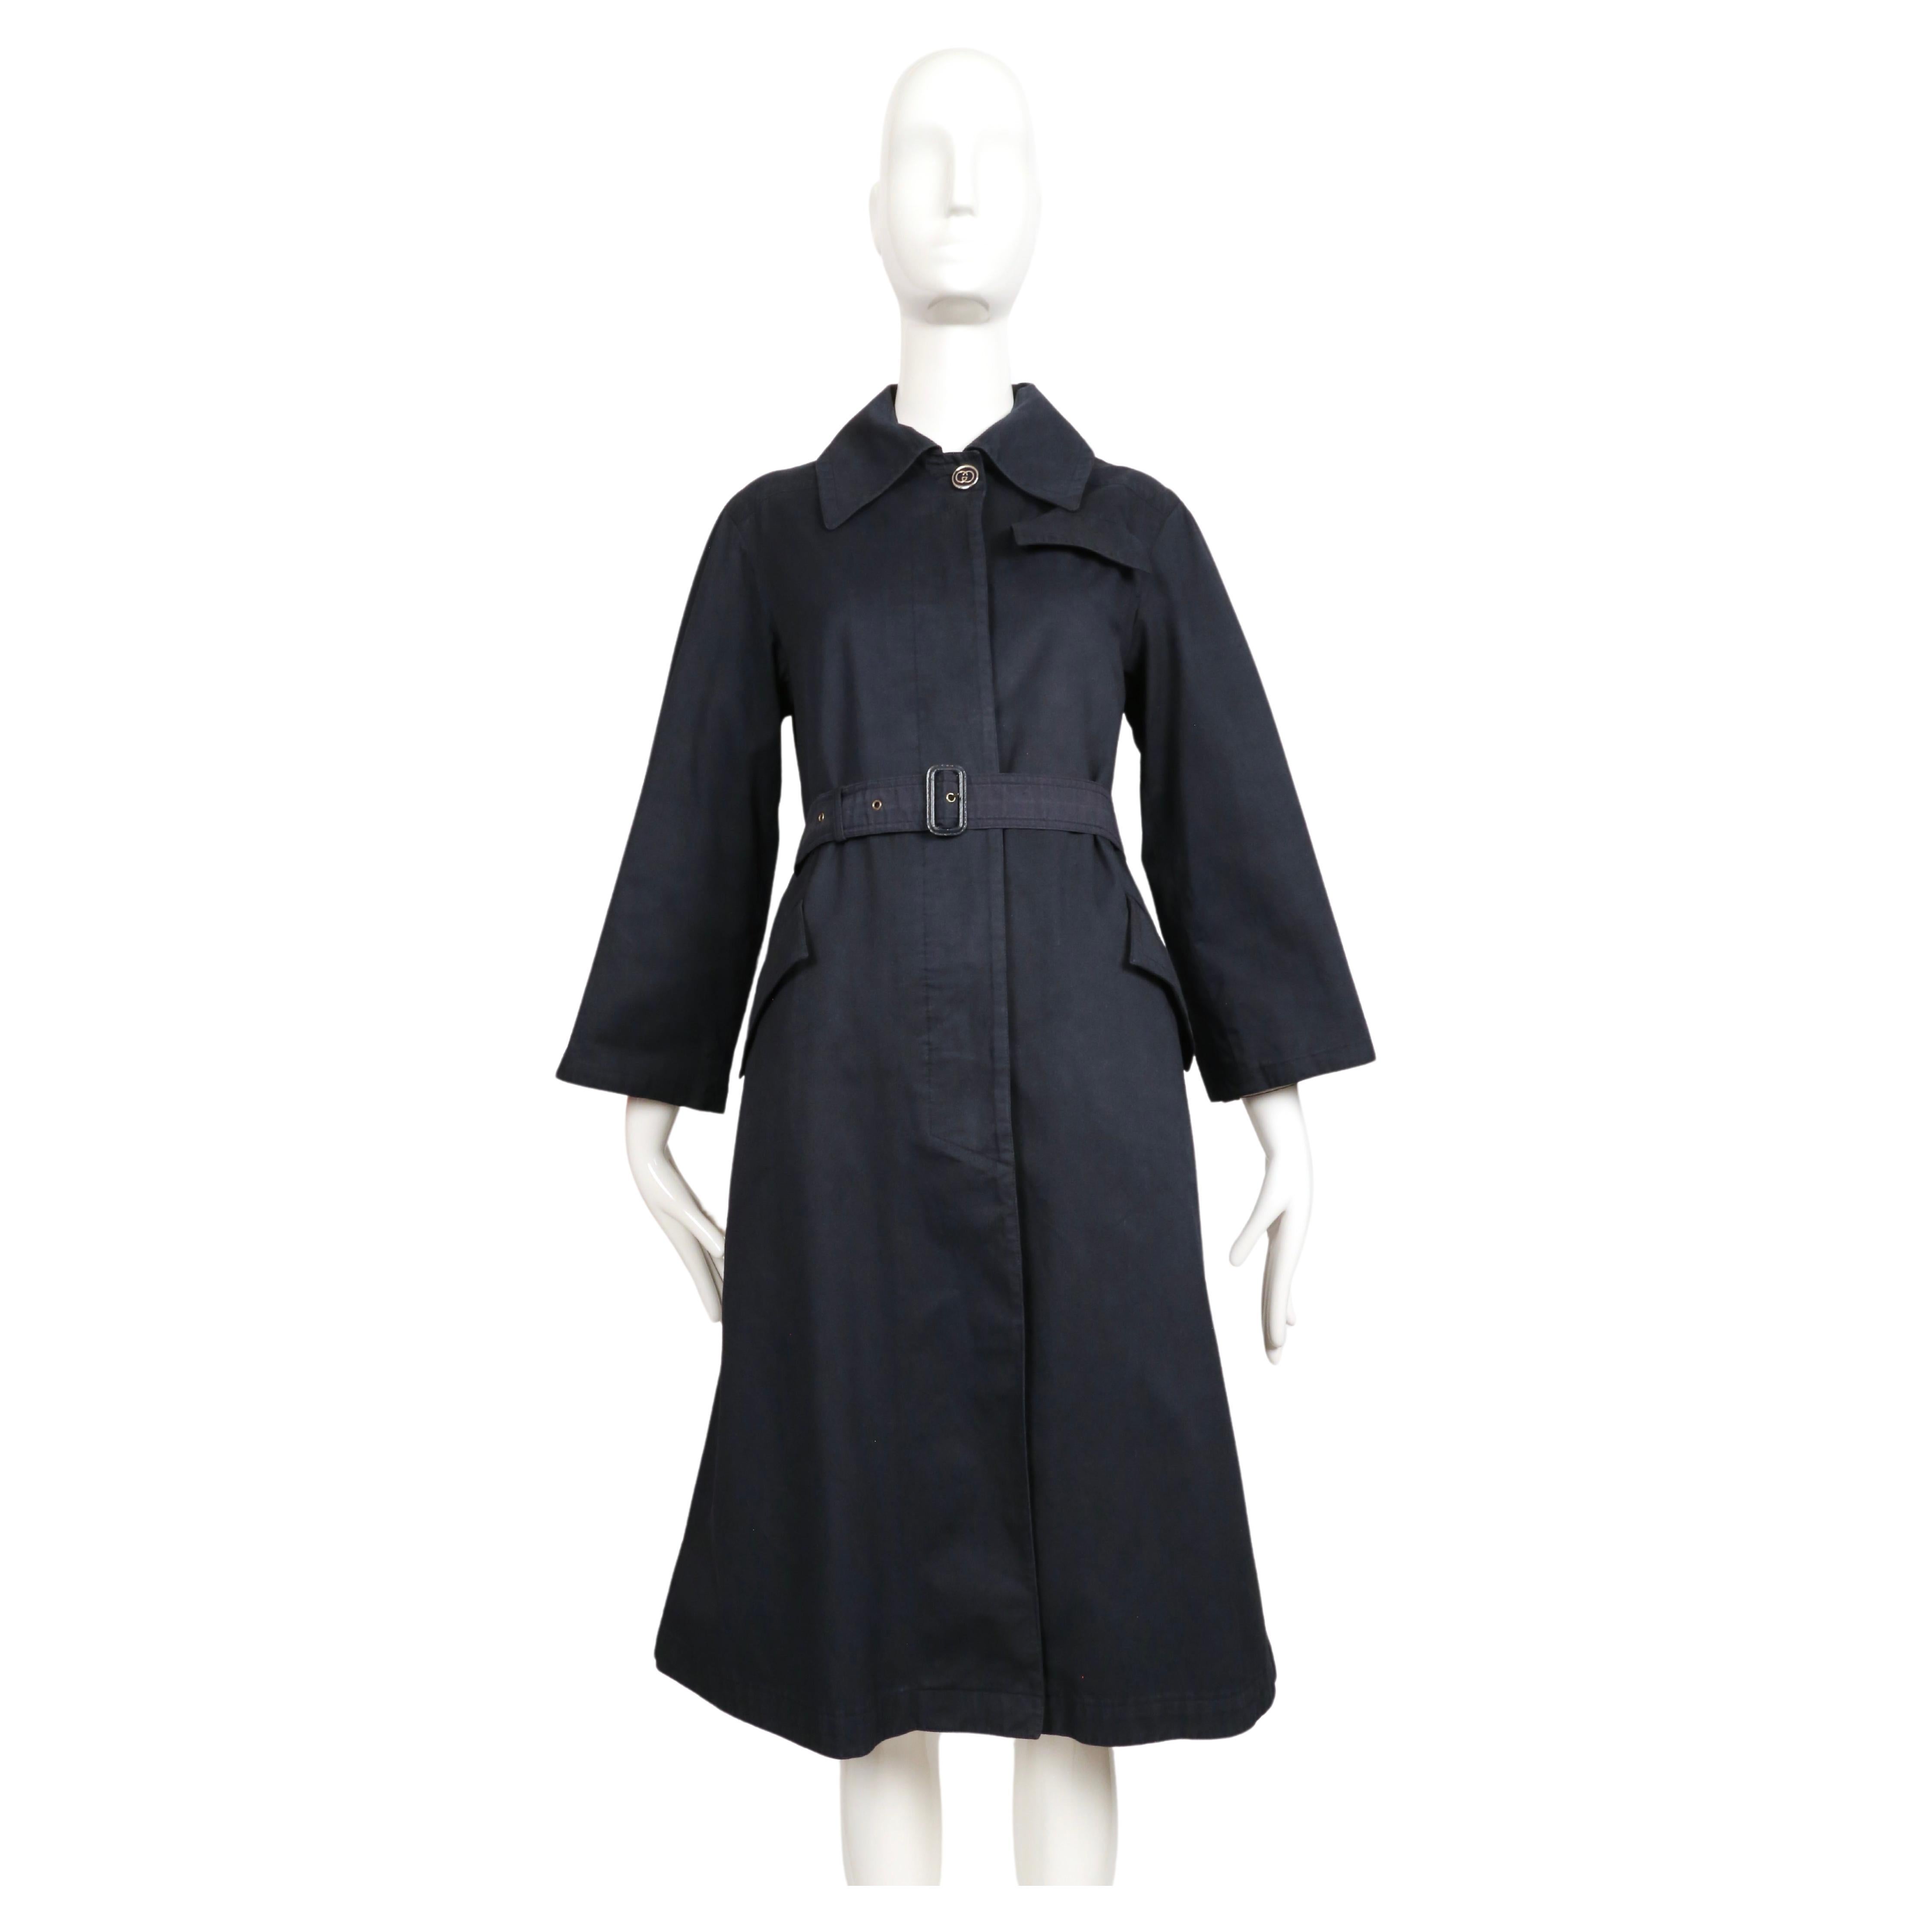 Very rare, navy blue trench coat with enameled GG buttons designed by Gucci dating to the 1970's. Labeled an Italian 42, however this best fits a US 2-6. Approximate measurements: shoulder 16